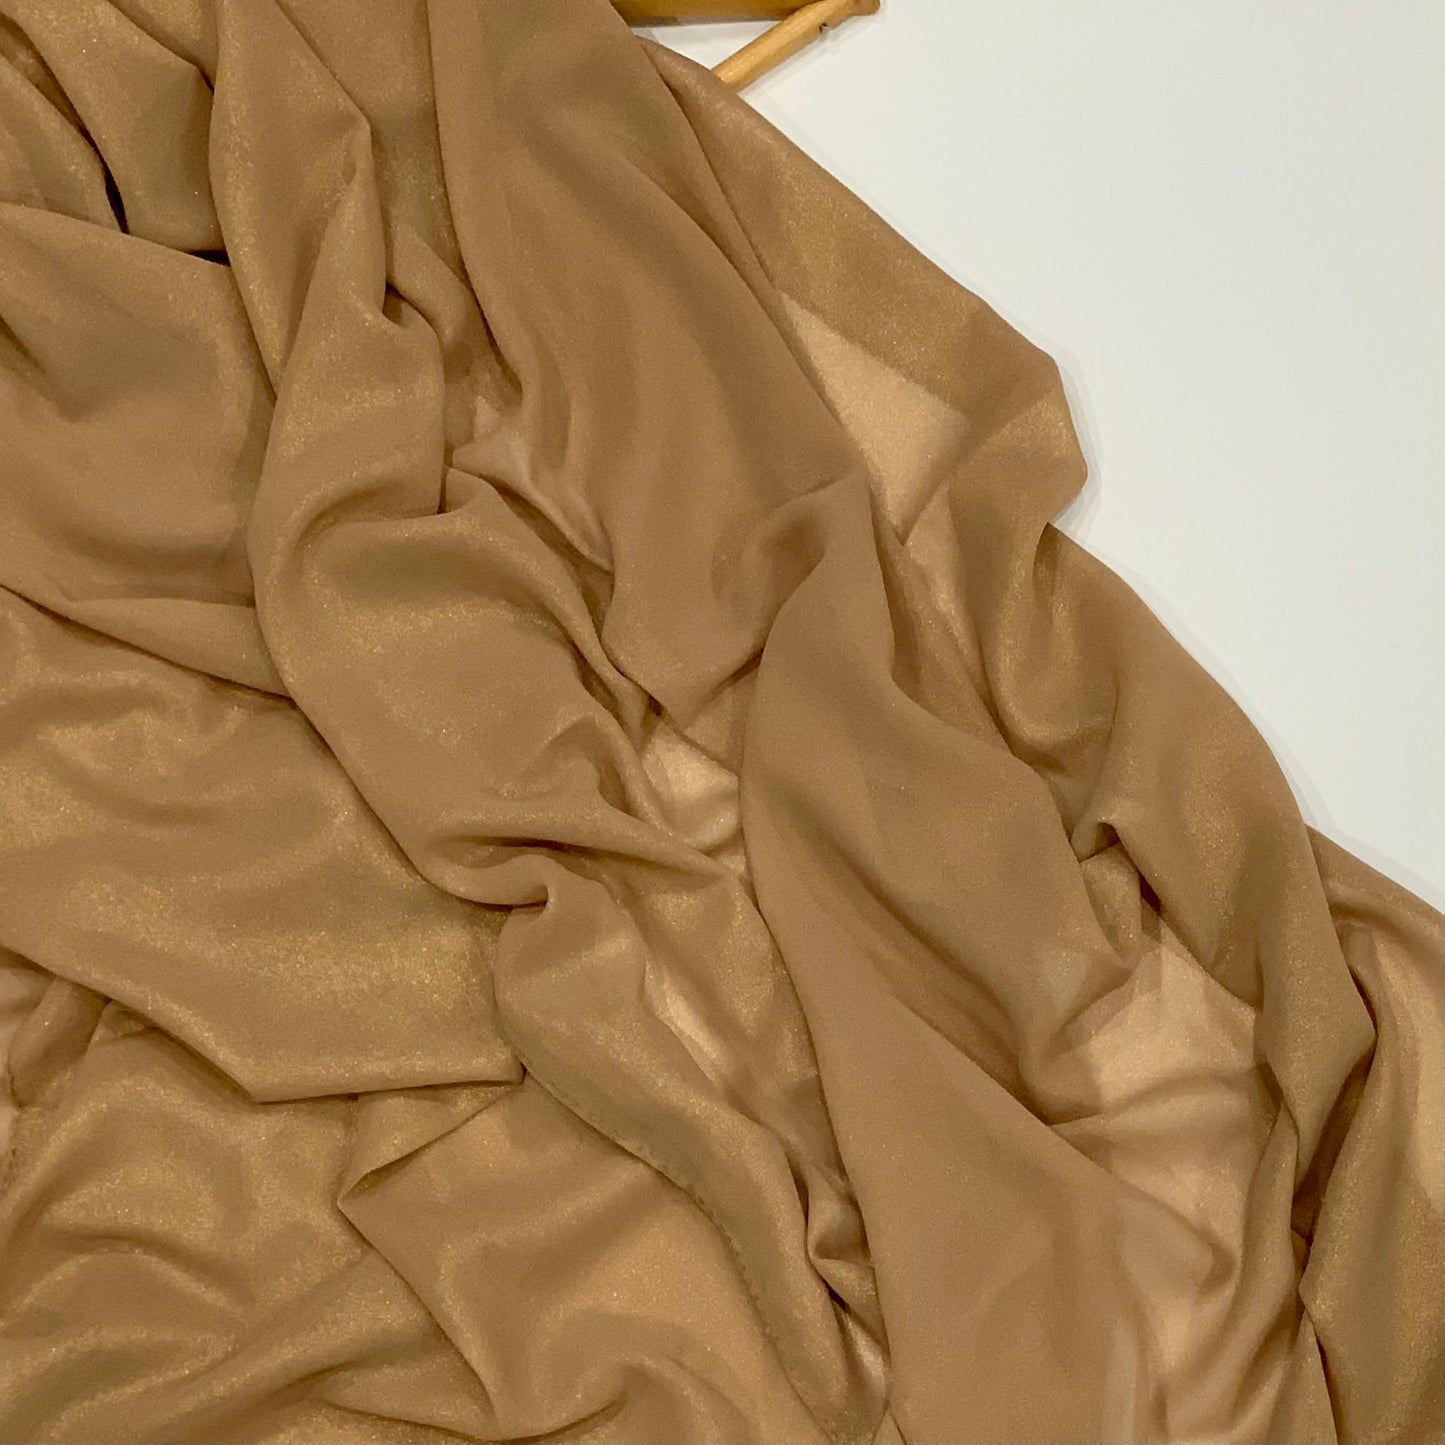 Dark Gold Shimmer Chiffon Hijab  https://www.arifasboutique.com/products/beige-gold-shimmer-chiffon-hijab  Shimmer Chiffon Hijabs are the perfect balance of style and shine. The perfect piece to compliment your outfit for any occasion Material: 100% Polyester Size: 180 cm x 70 cm 